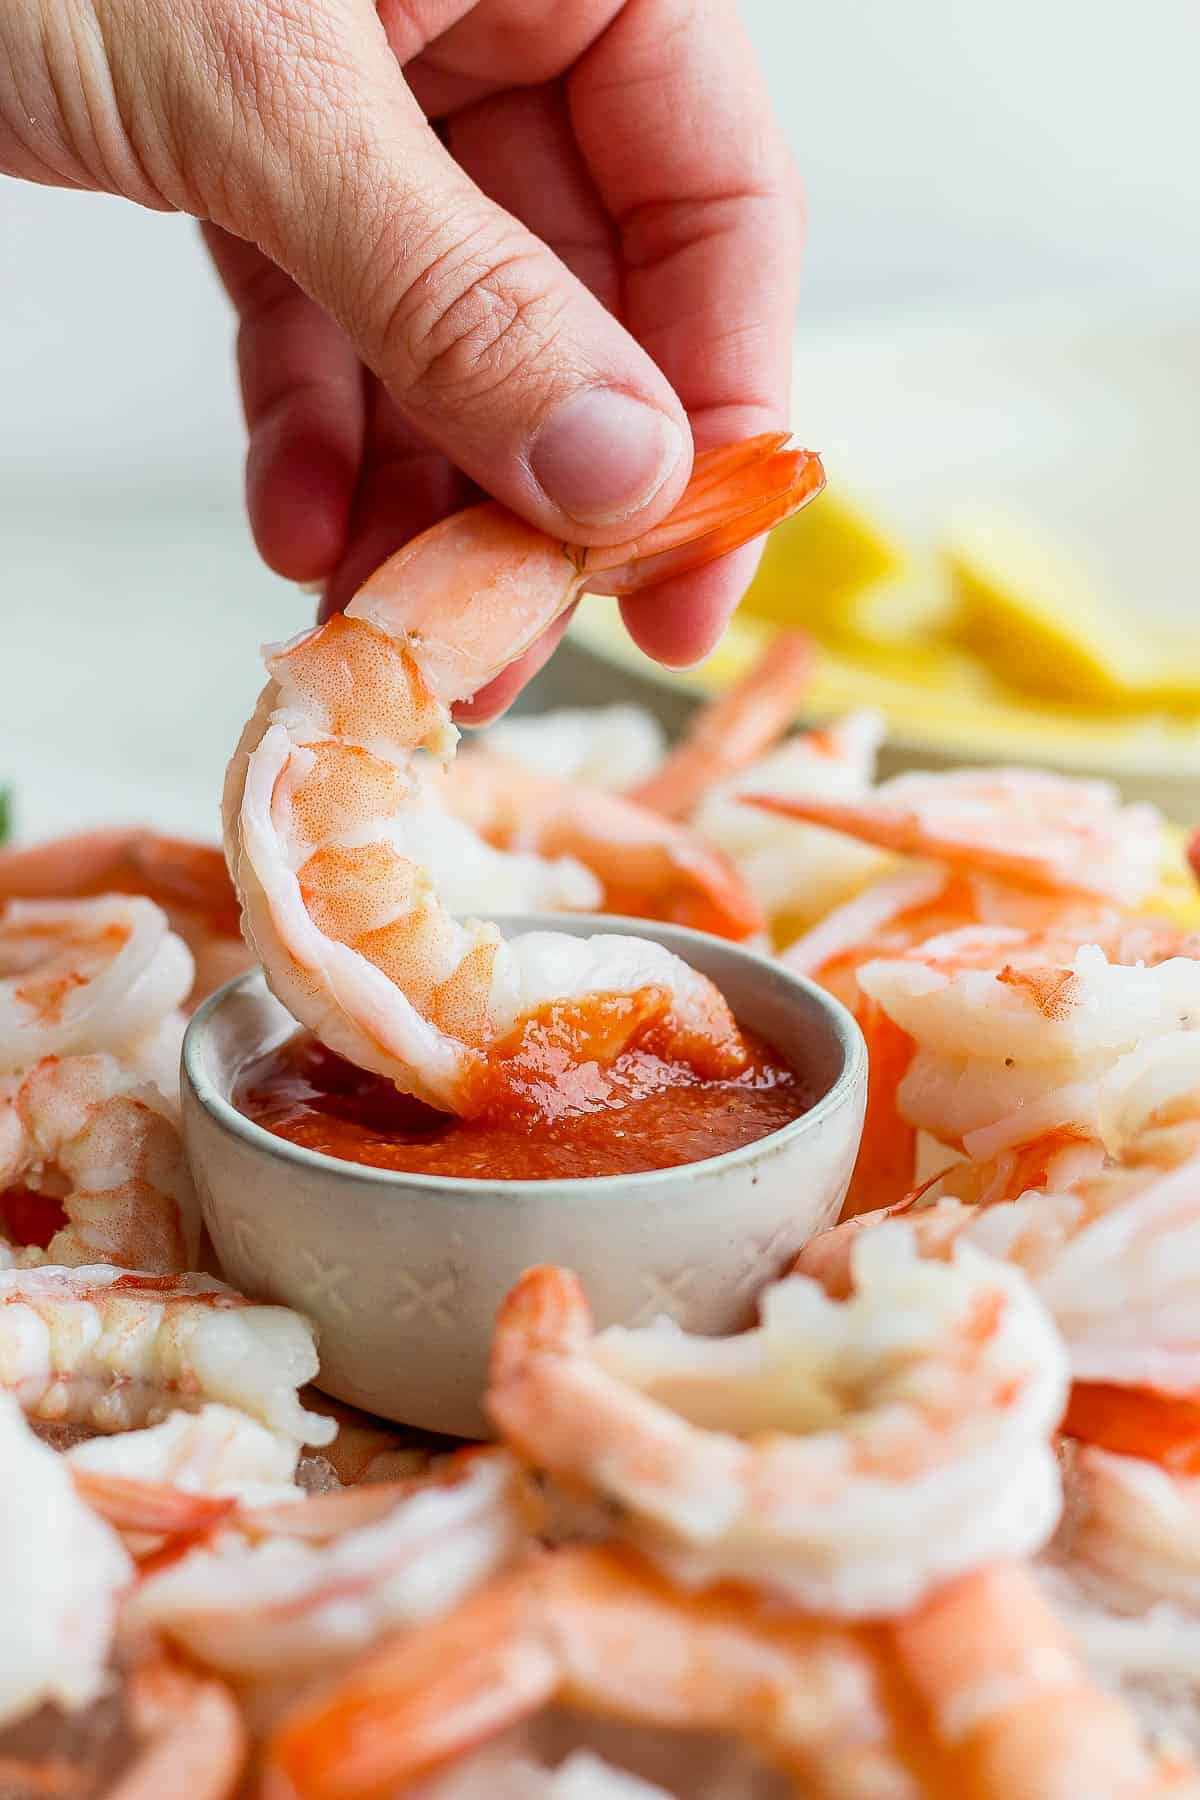 A hand scooping a shrimp into the small bowl of cocktail sauce.